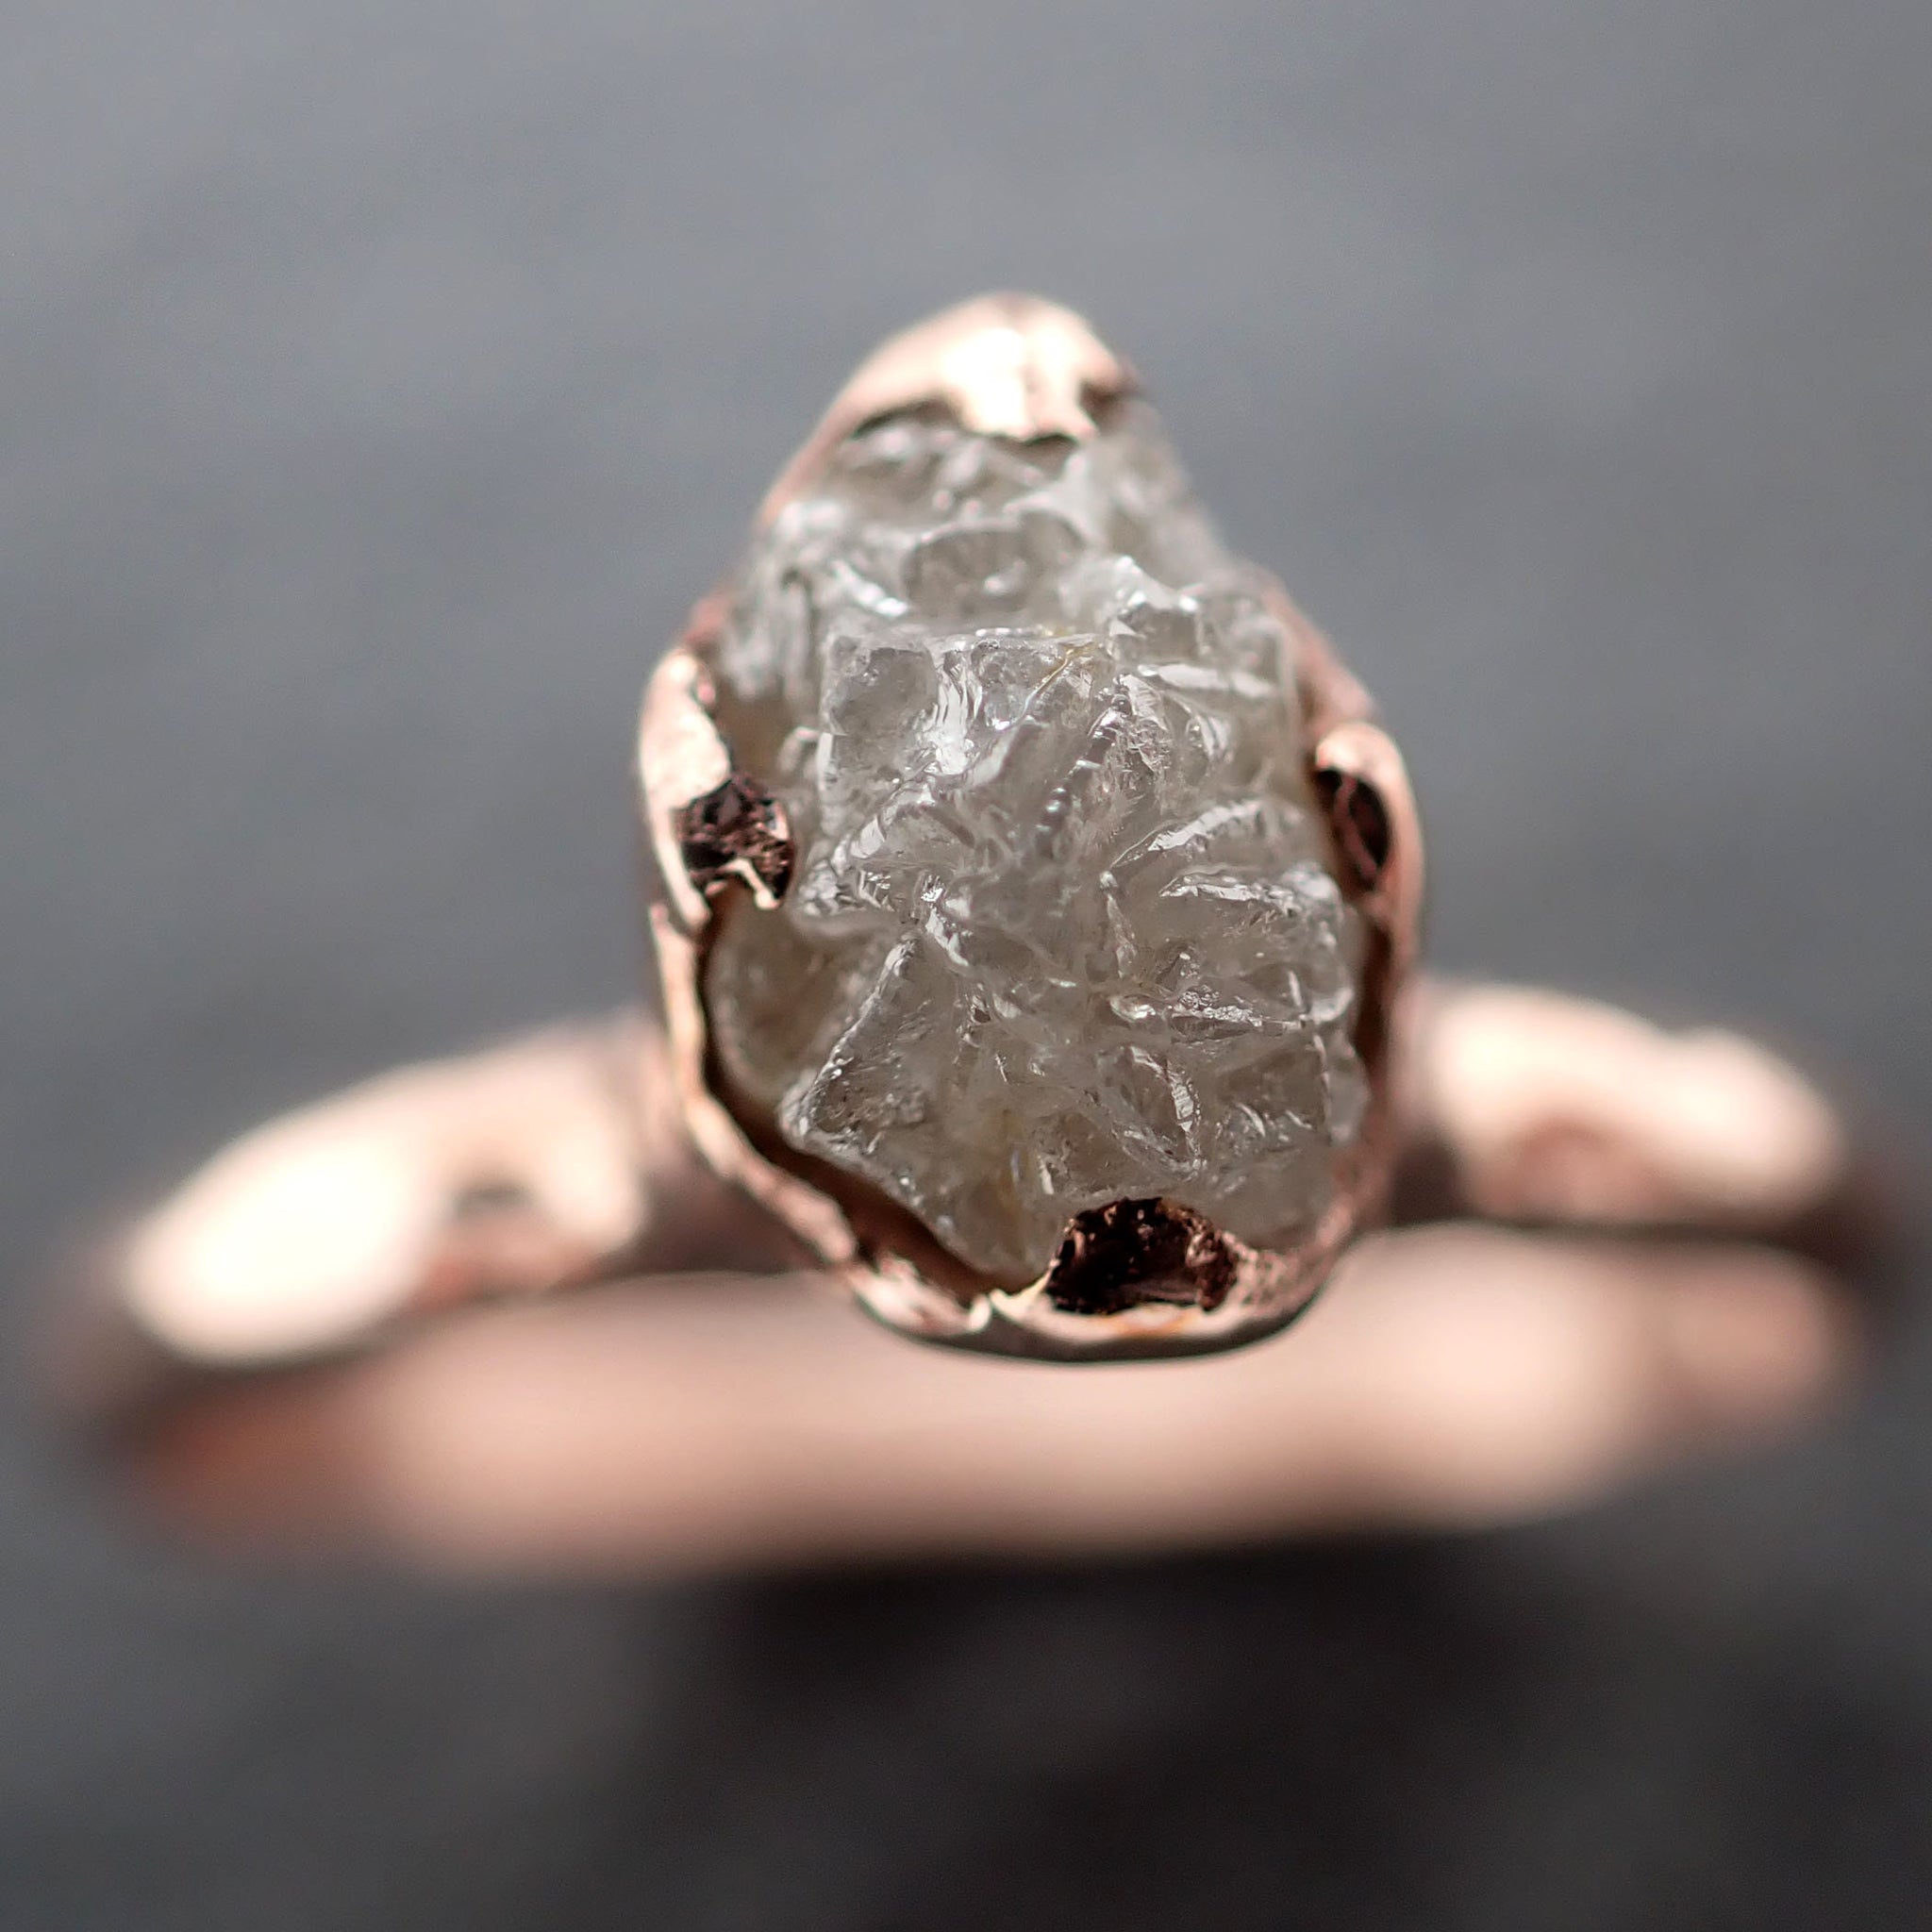 Top 8 Eco-Friendly, Conflict-Free Engagement Rings - Shiny Rock Polished